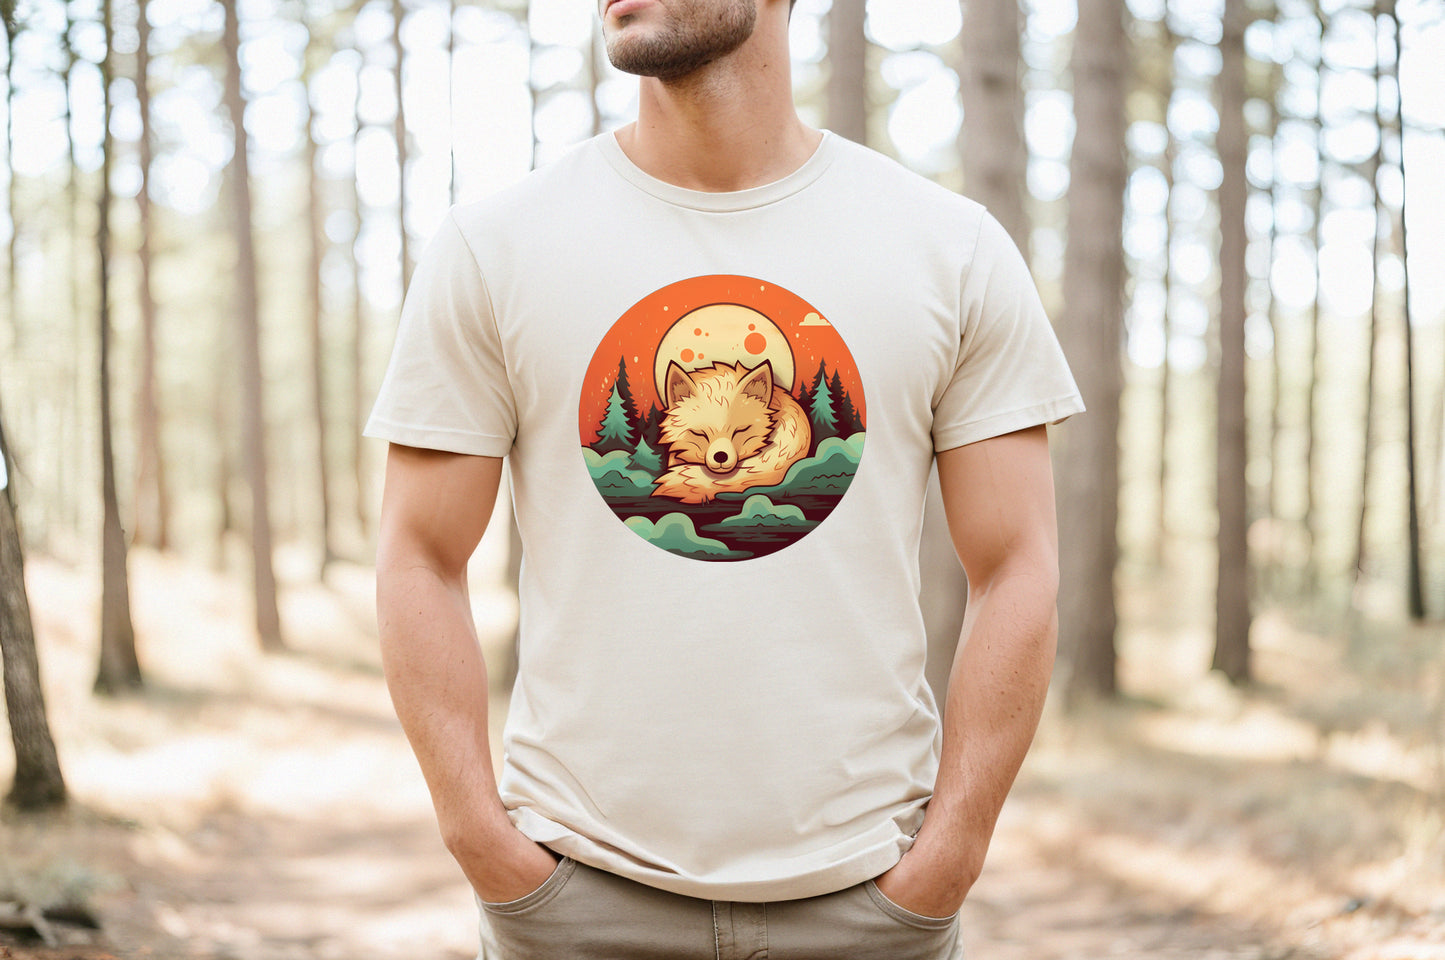 Sleeping Fox in the Forest Staple Tee, Kawaii Style Fox Dreaming in the Forest T-Shirt, Resting in Nature's Embrace, Cute Fox Tee